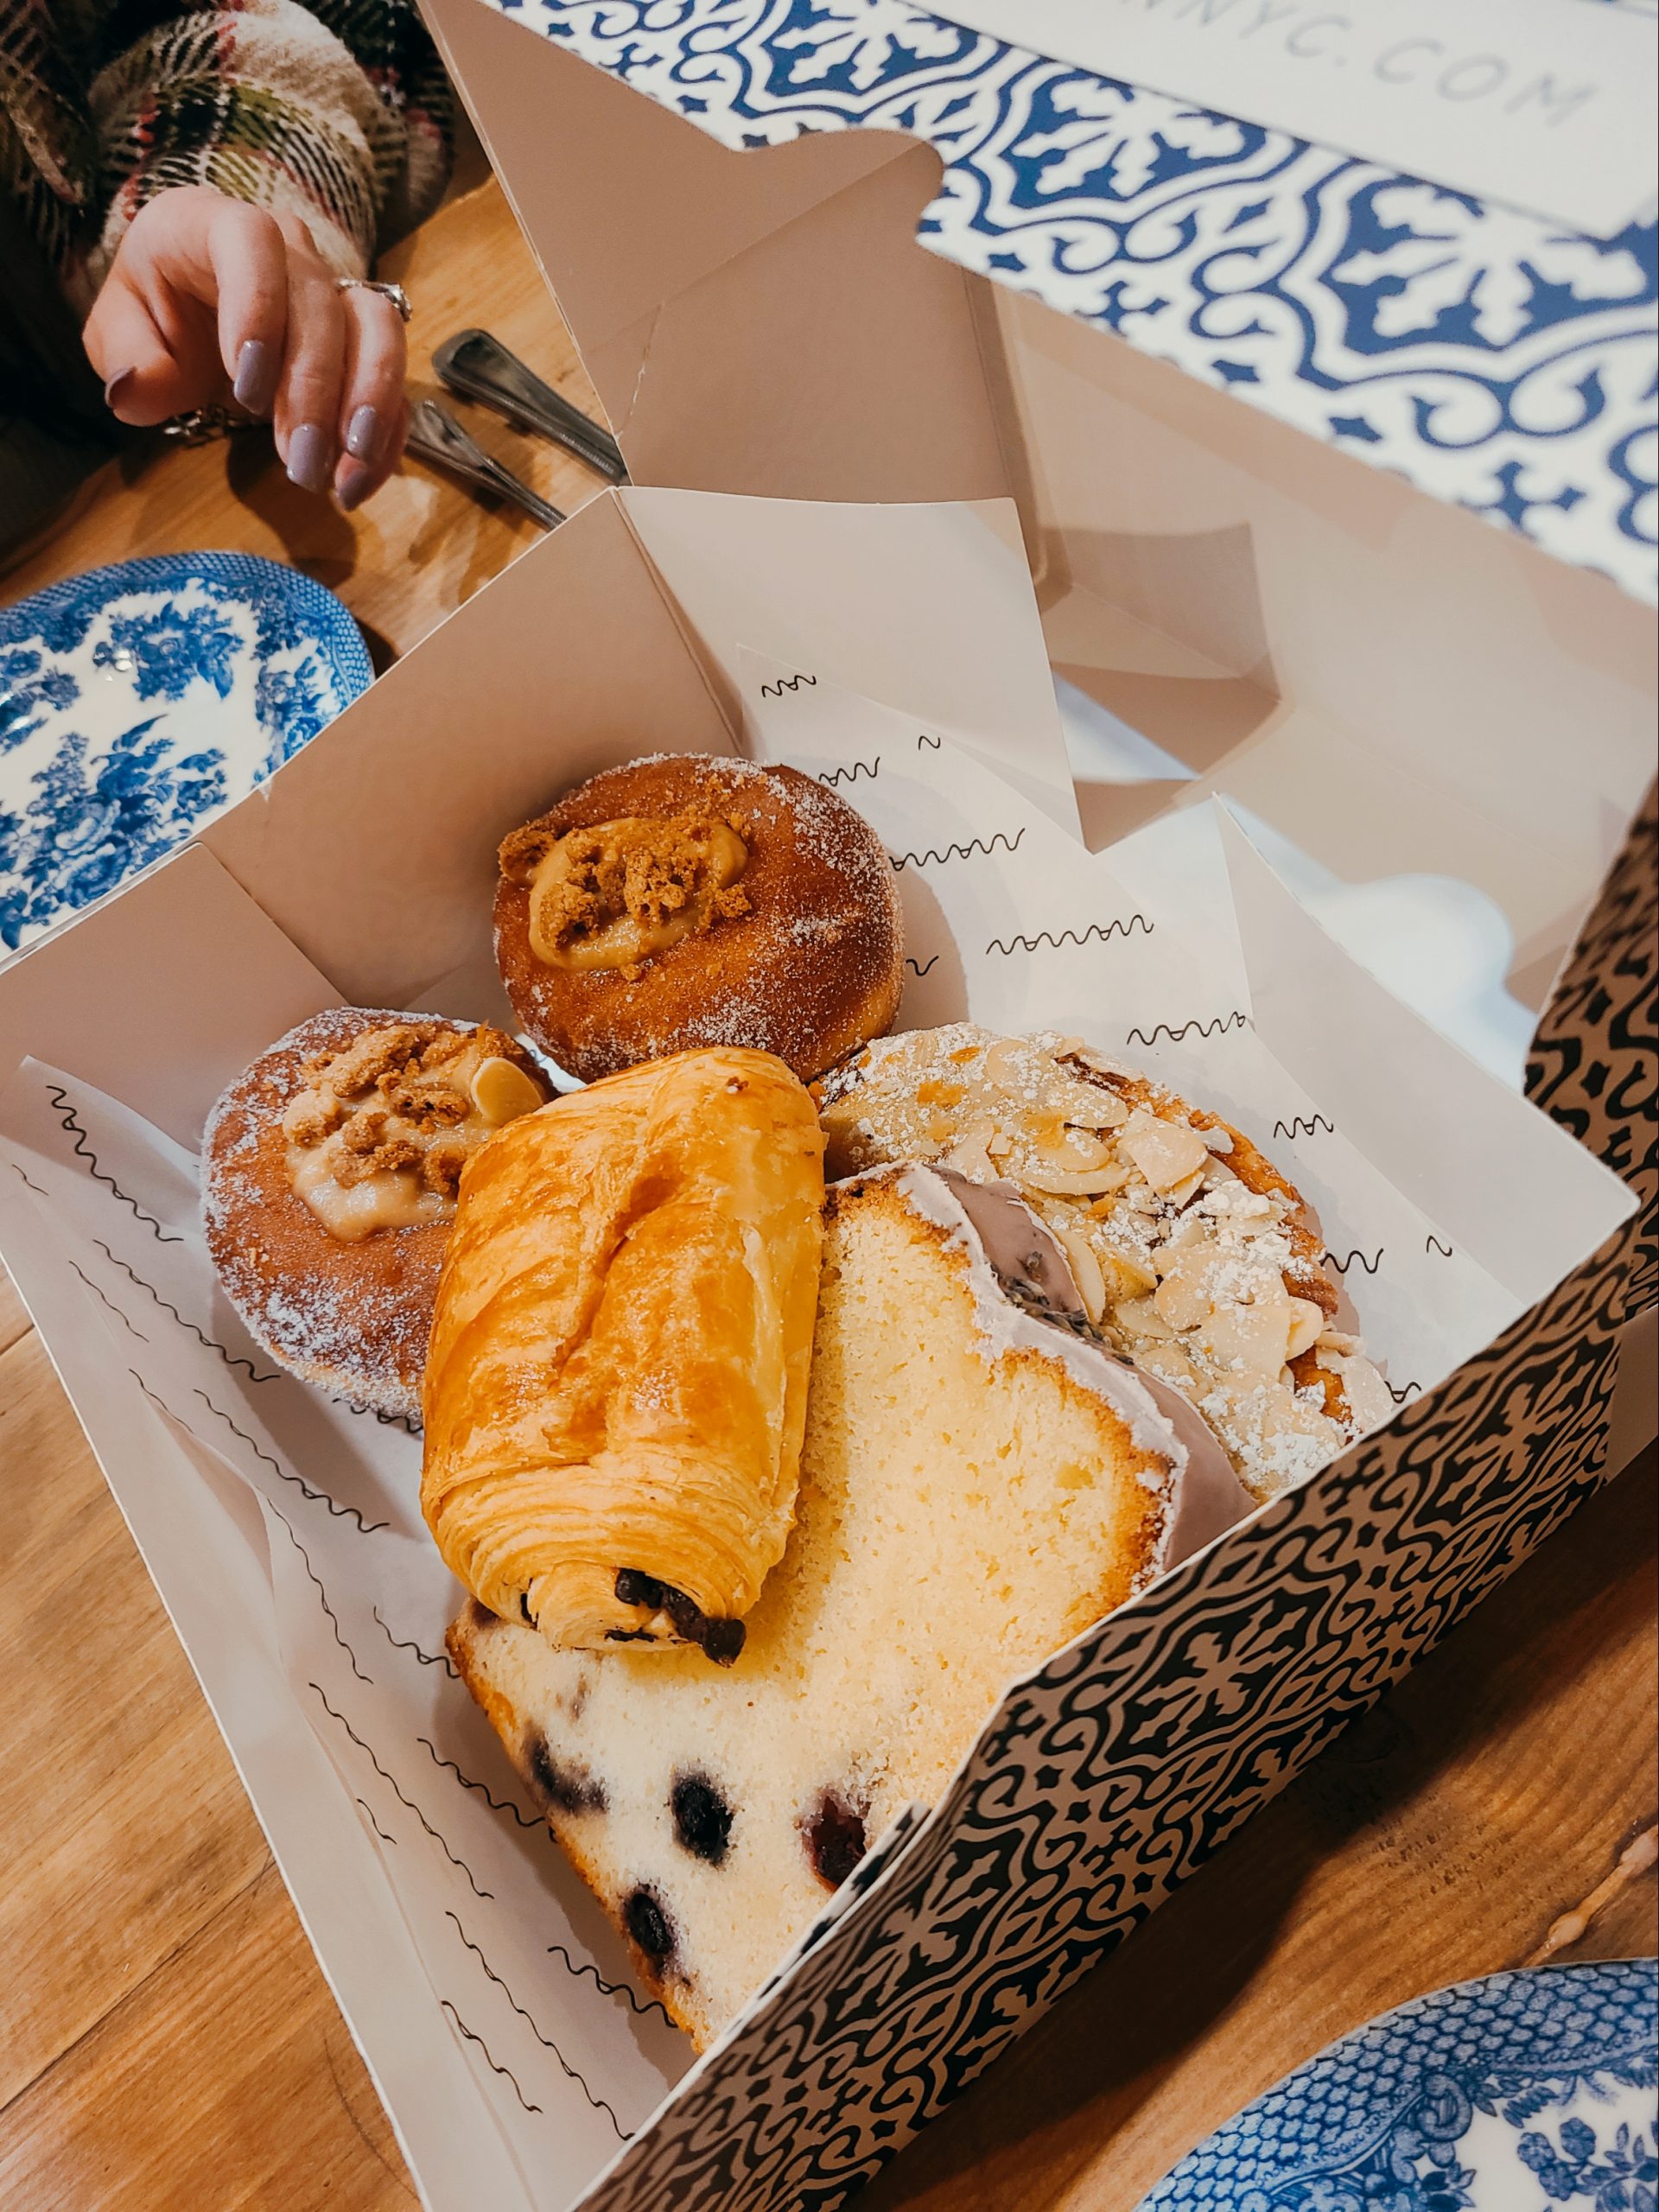 A box of pastries